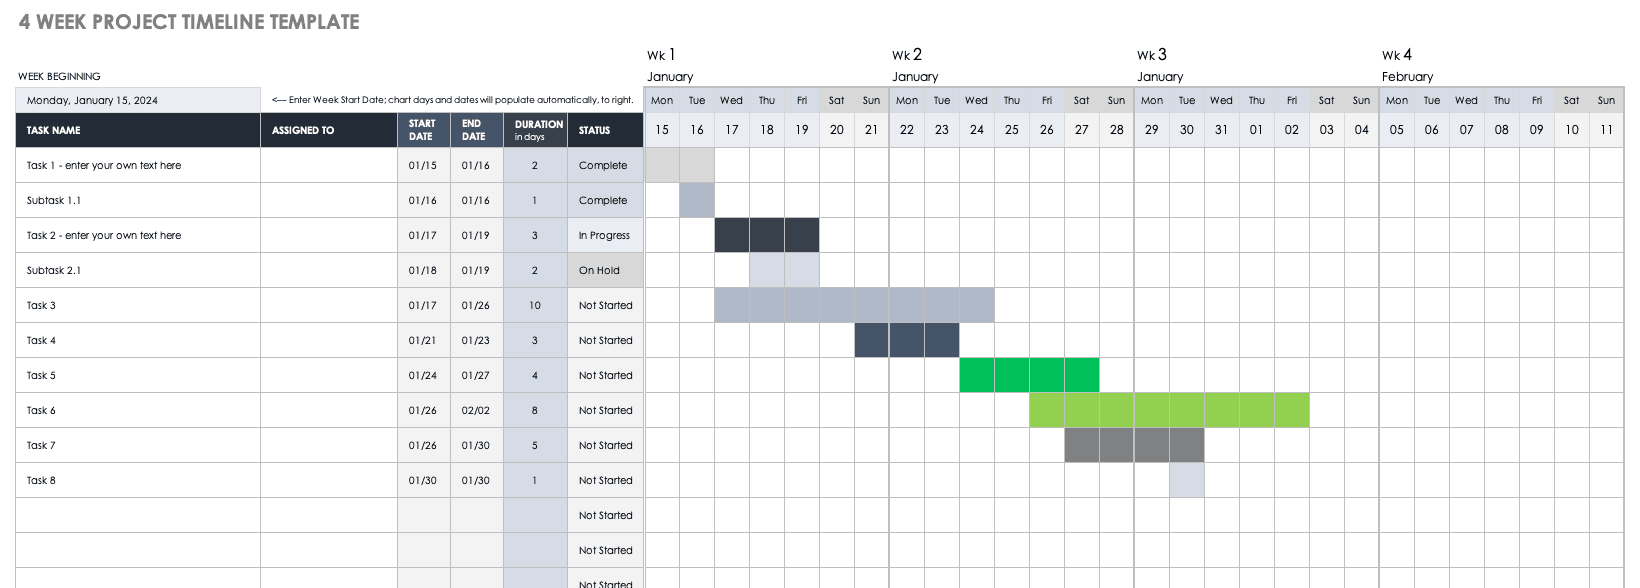 Project Management Timeline Template Excel Free